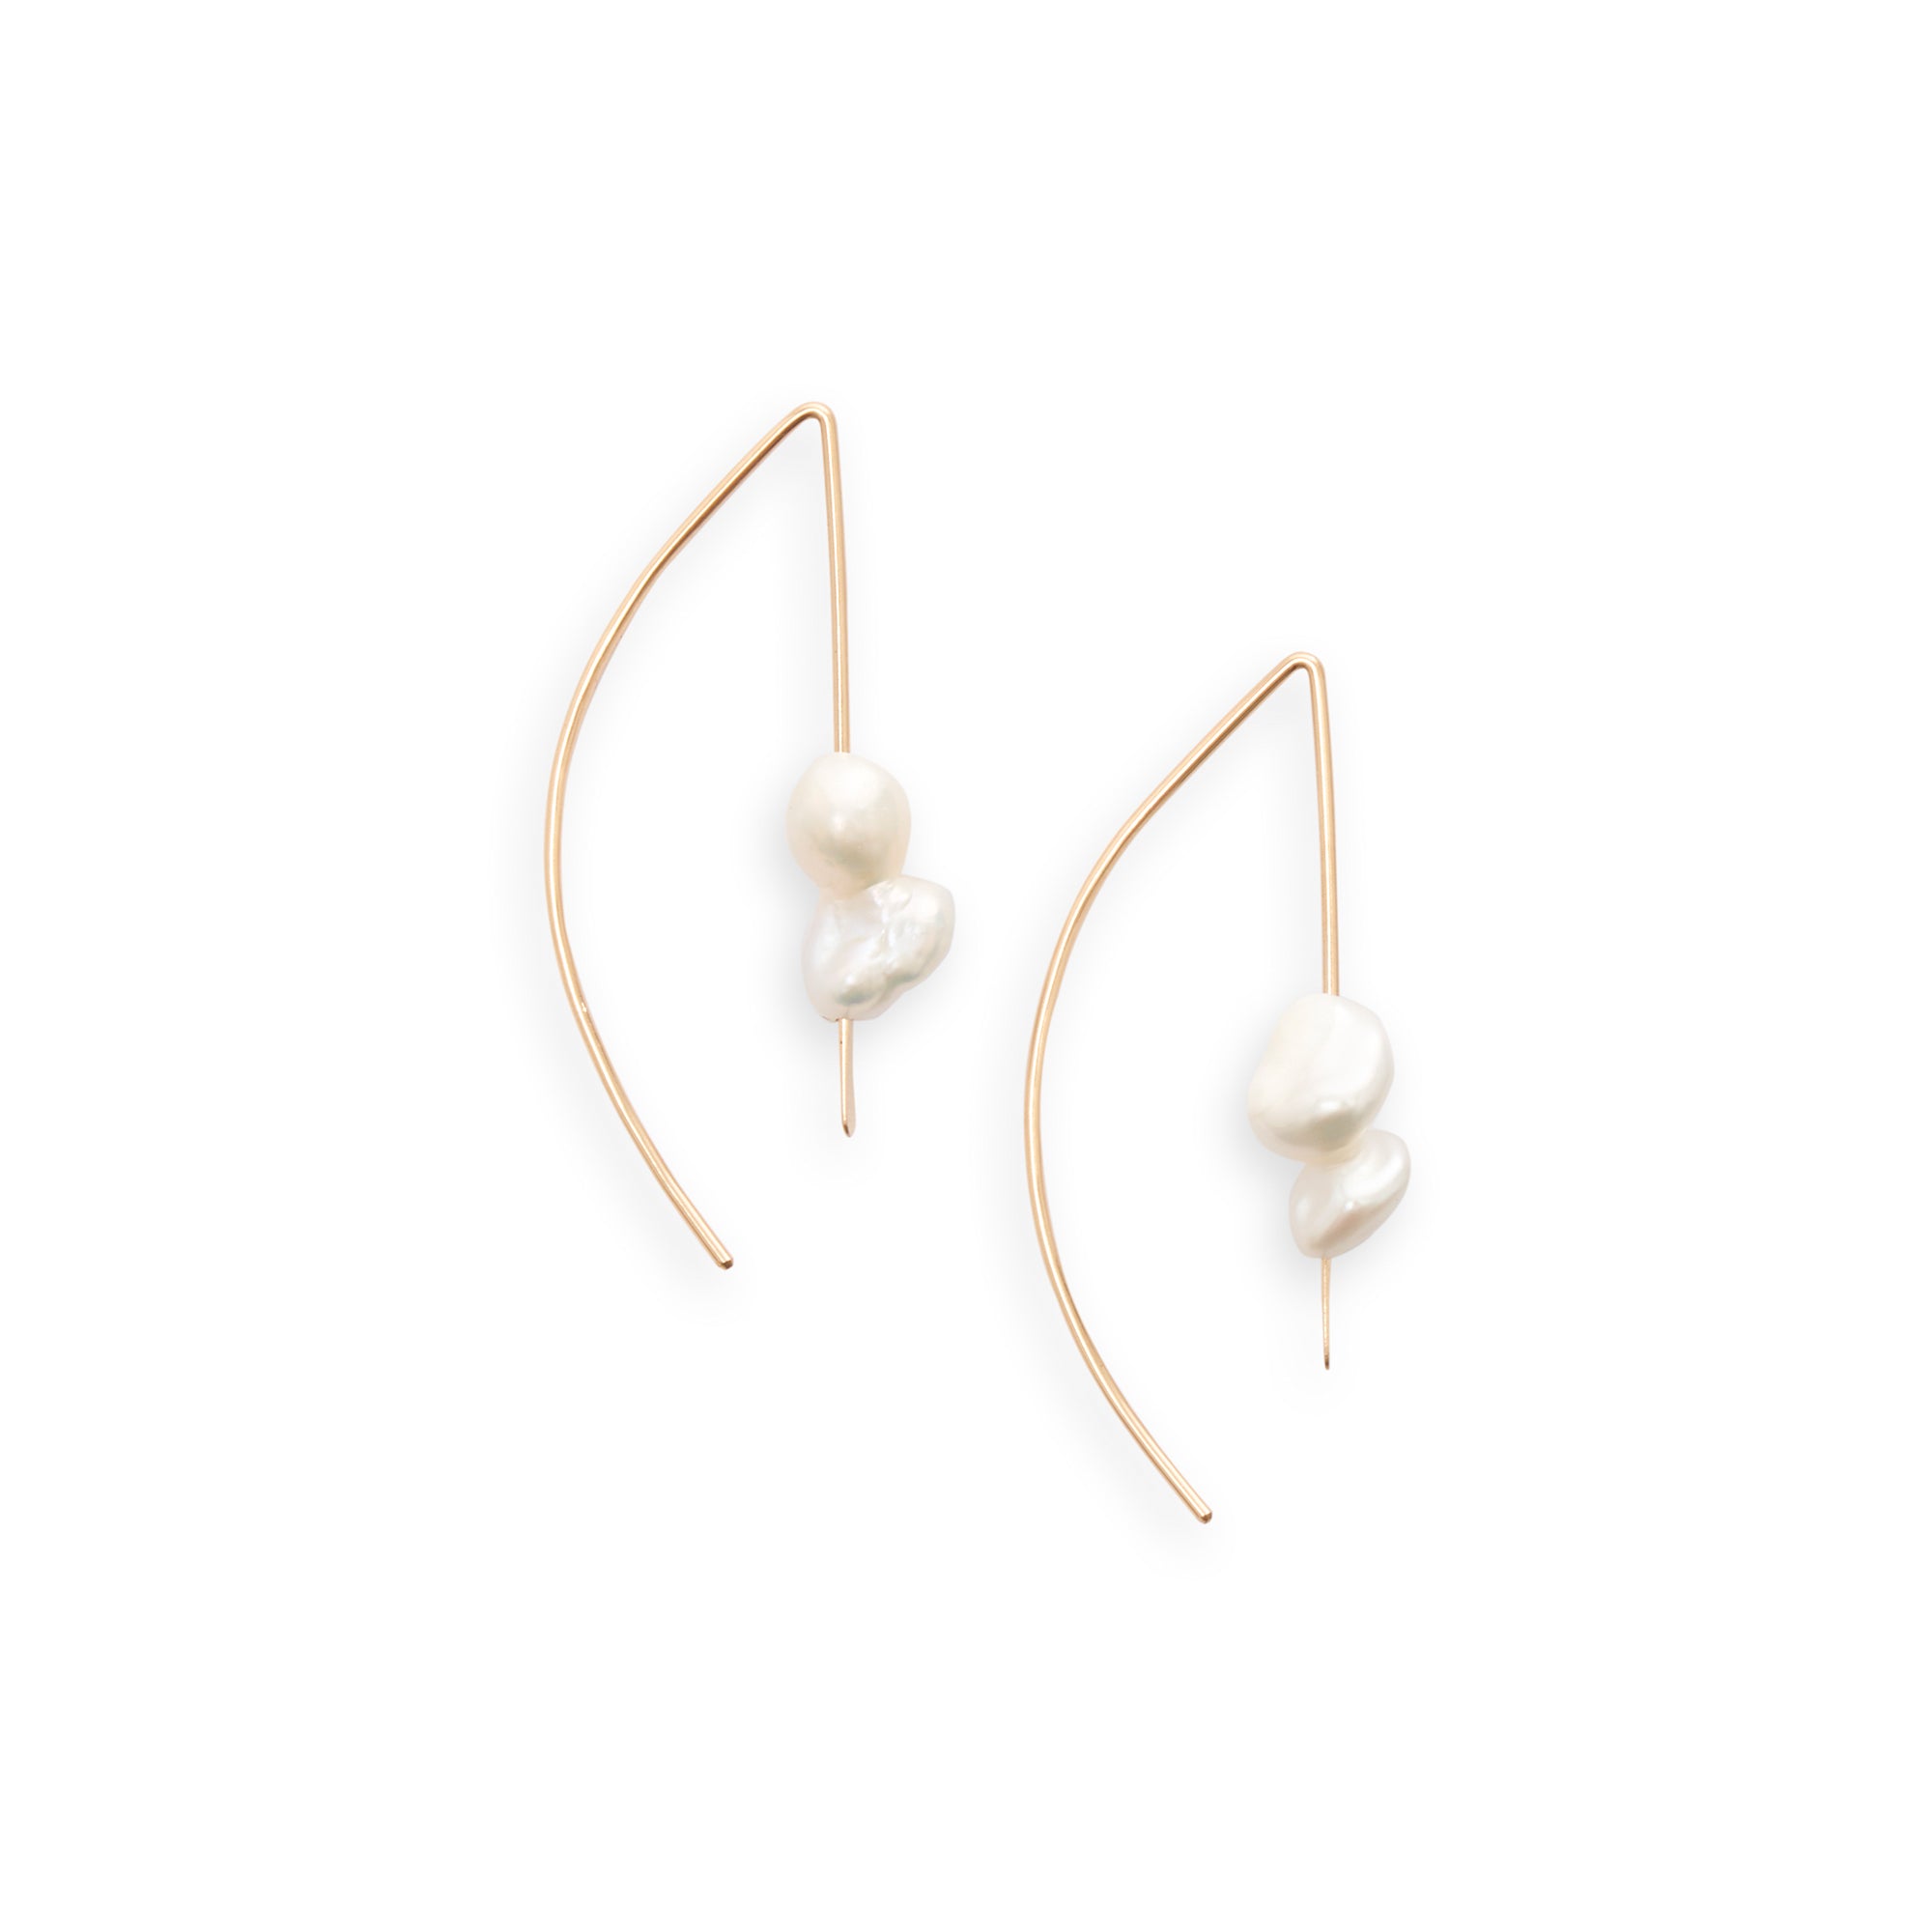 A modern threader earring with drops of Keshi pearls to add an element of classic elegance.   